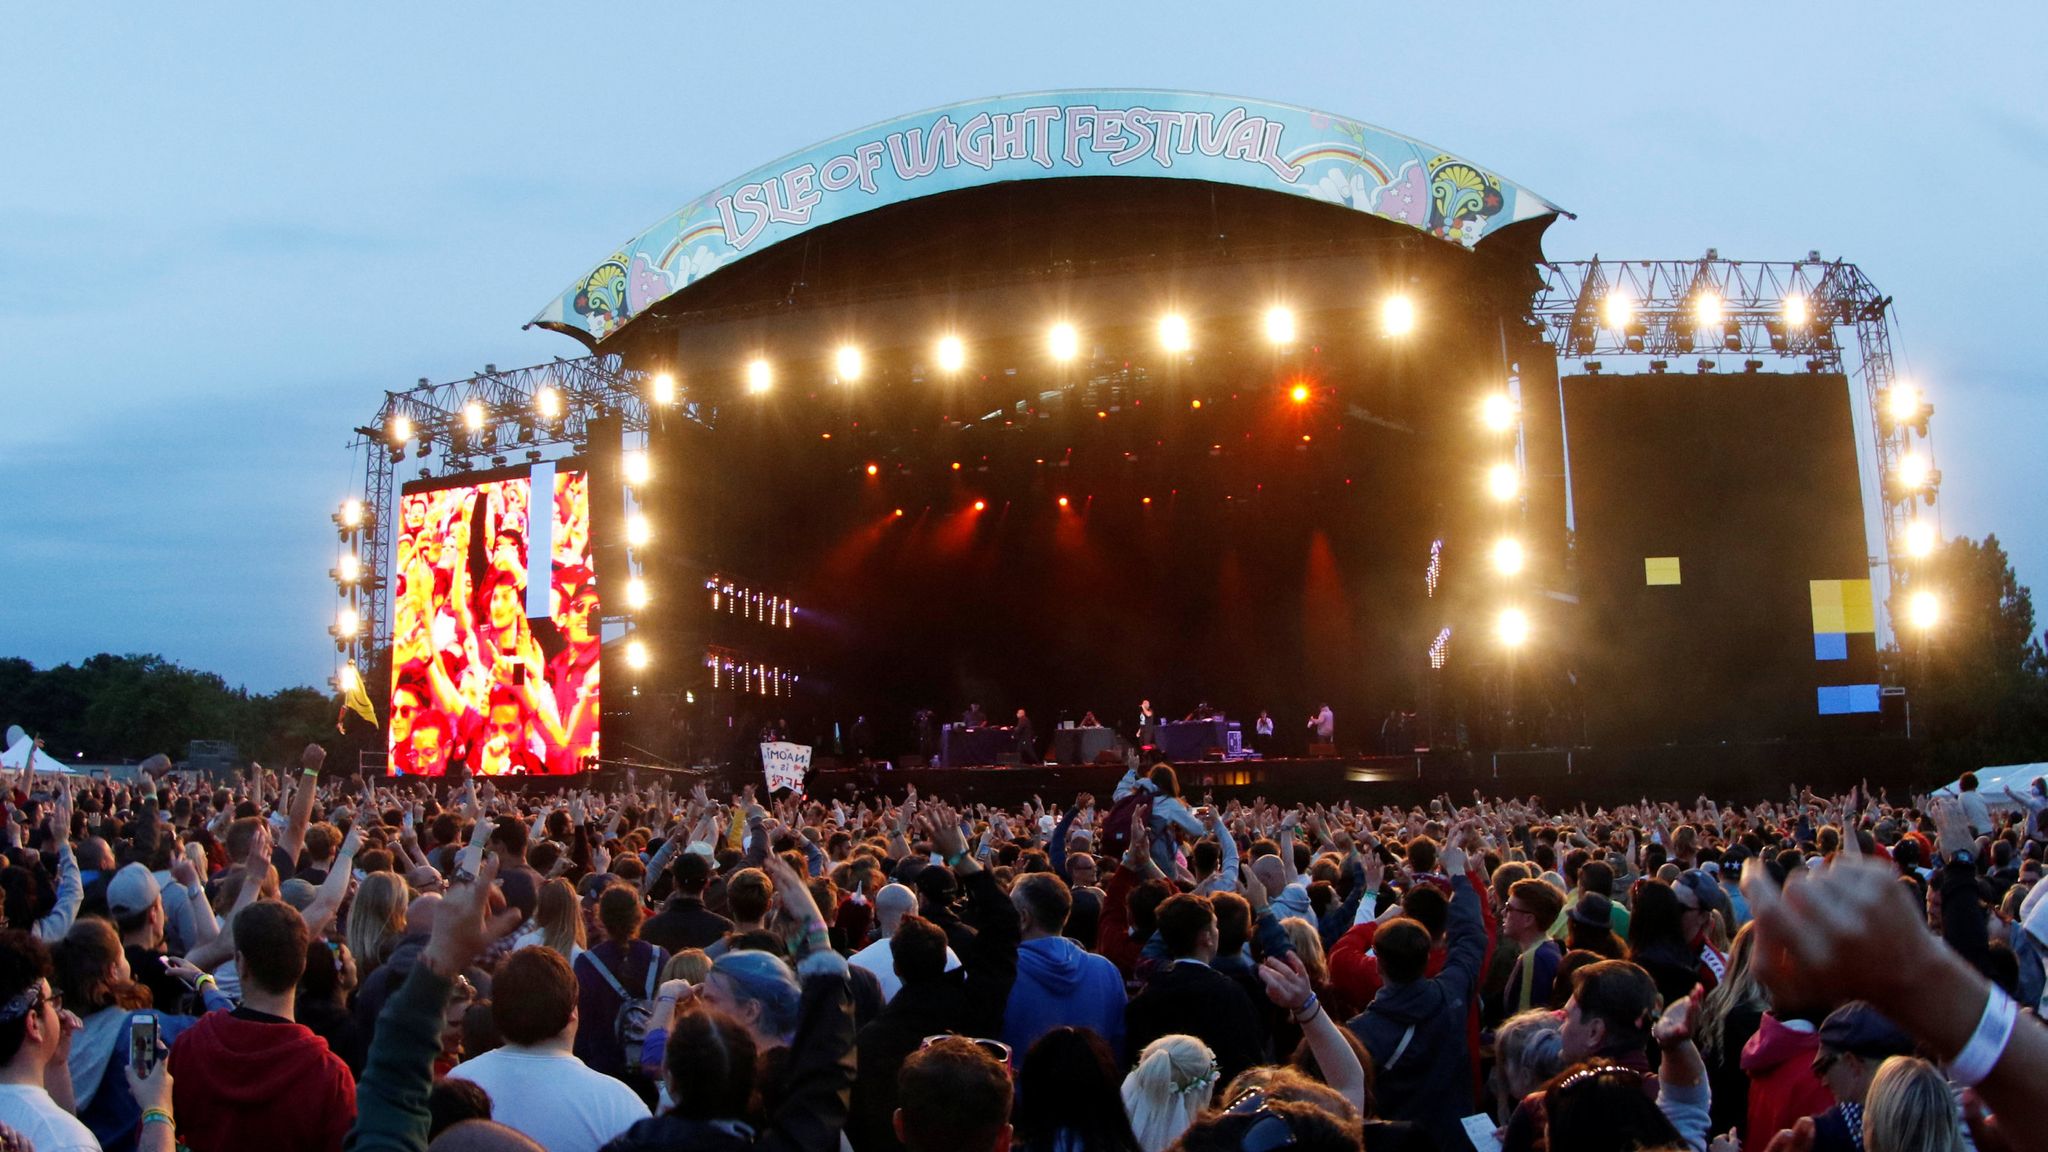 Isle of Wight Festival in pictures Ents & Arts News Sky News